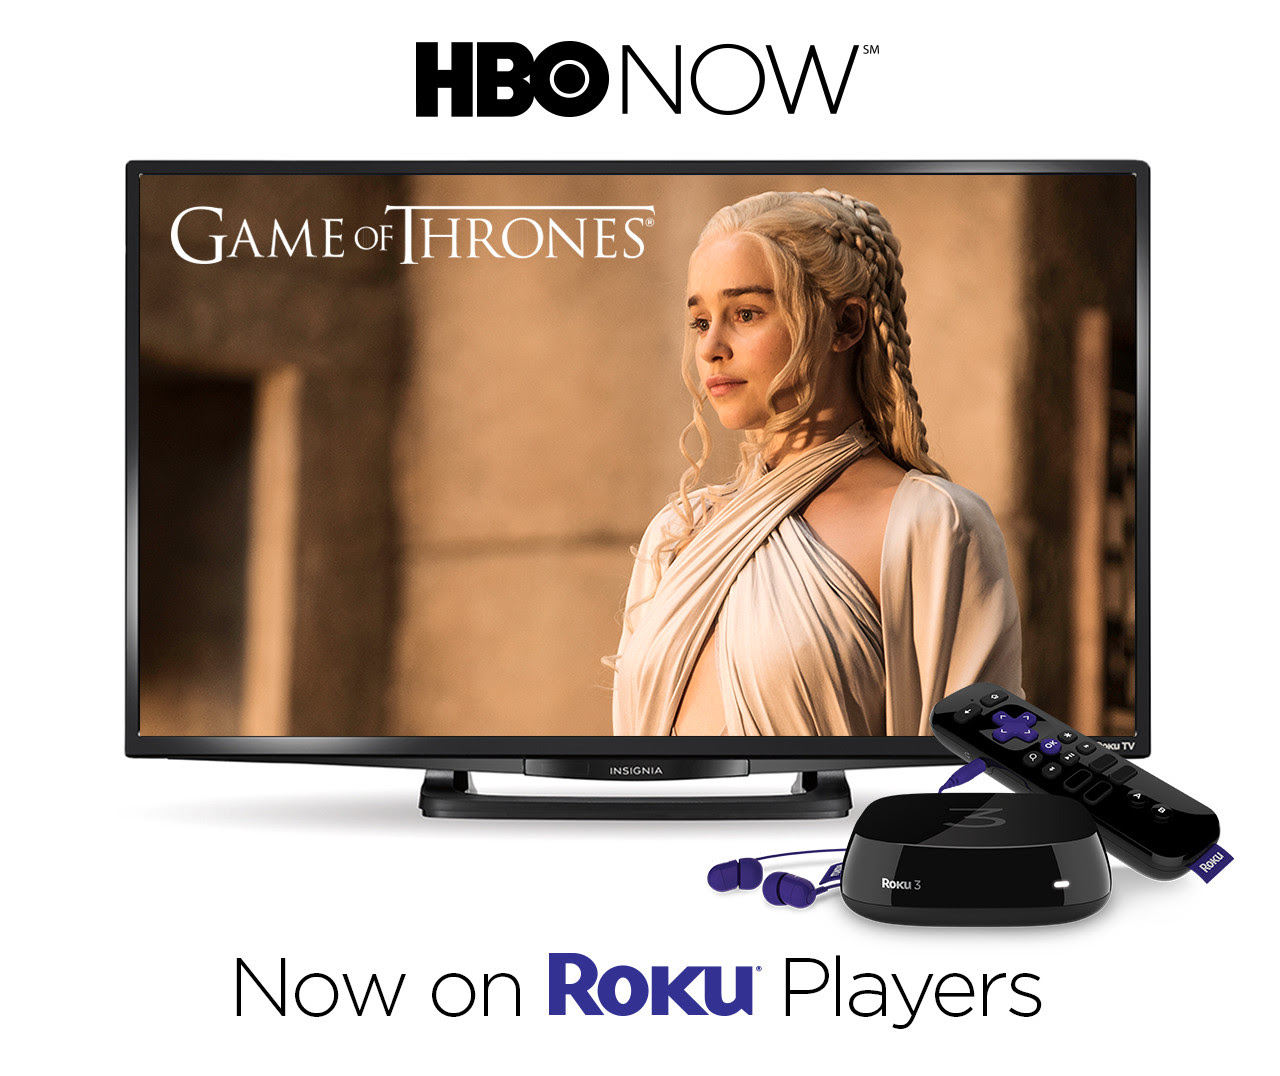 HBO NOW Will NOT Offer 4K Streaming on the Roku 4